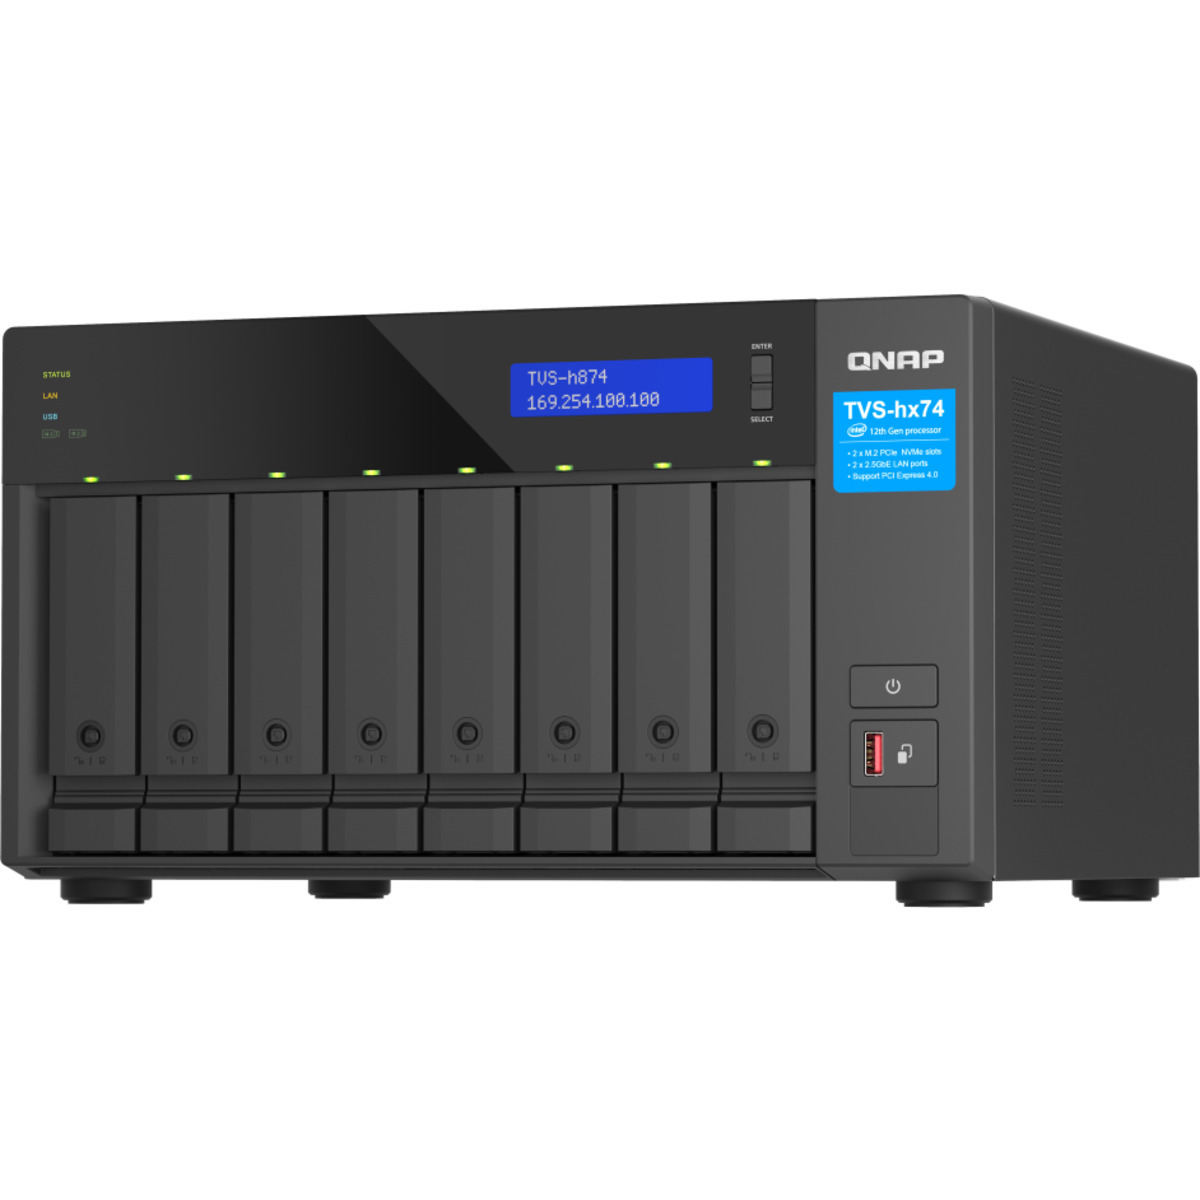 buy $6428 QNAP TVS-h874 Core i5 160tb Desktop NAS - Network Attached Storage Device 8x20000gb Western Digital Red Pro WD201KFGX 3.5 7200rpm SATA 6Gb/s HDD NAS Class Drives Installed - Burn-In Tested - nas headquarters buy network attached storage server device das new raid-5 free shipping simply usa TVS-h874 Core i5